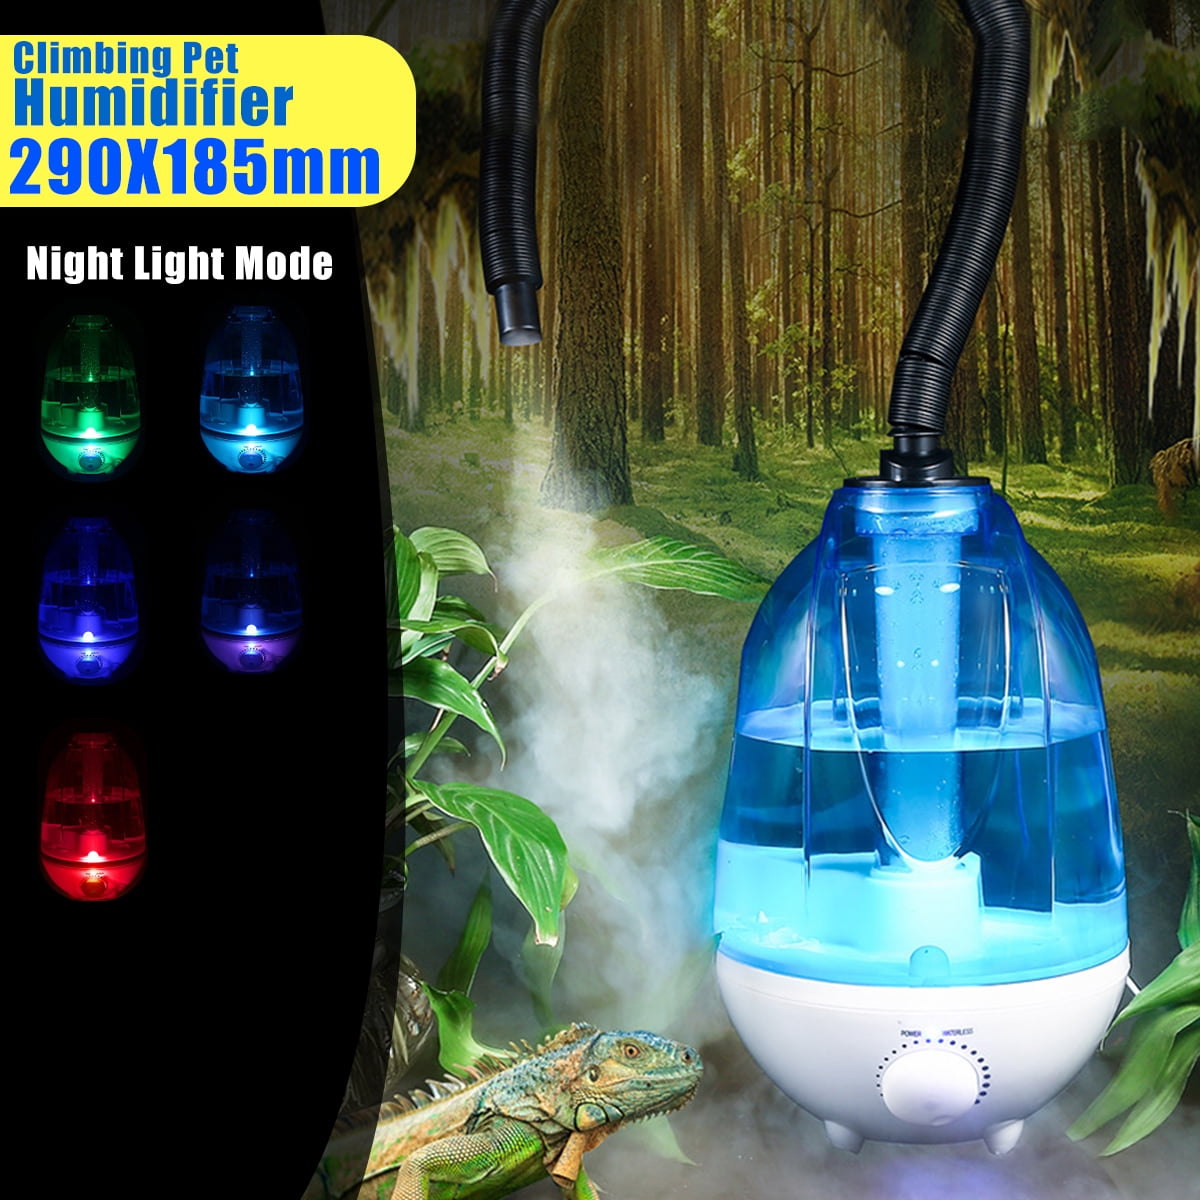 Reptile Humidifier Tank Ultra-Silent Humidifying Fog Machine Vaporizer Fog Maker Upgrade Reptile Humidifier Fogger 3 Liter for a Variety of Reptiles/Amphibians/Herps 